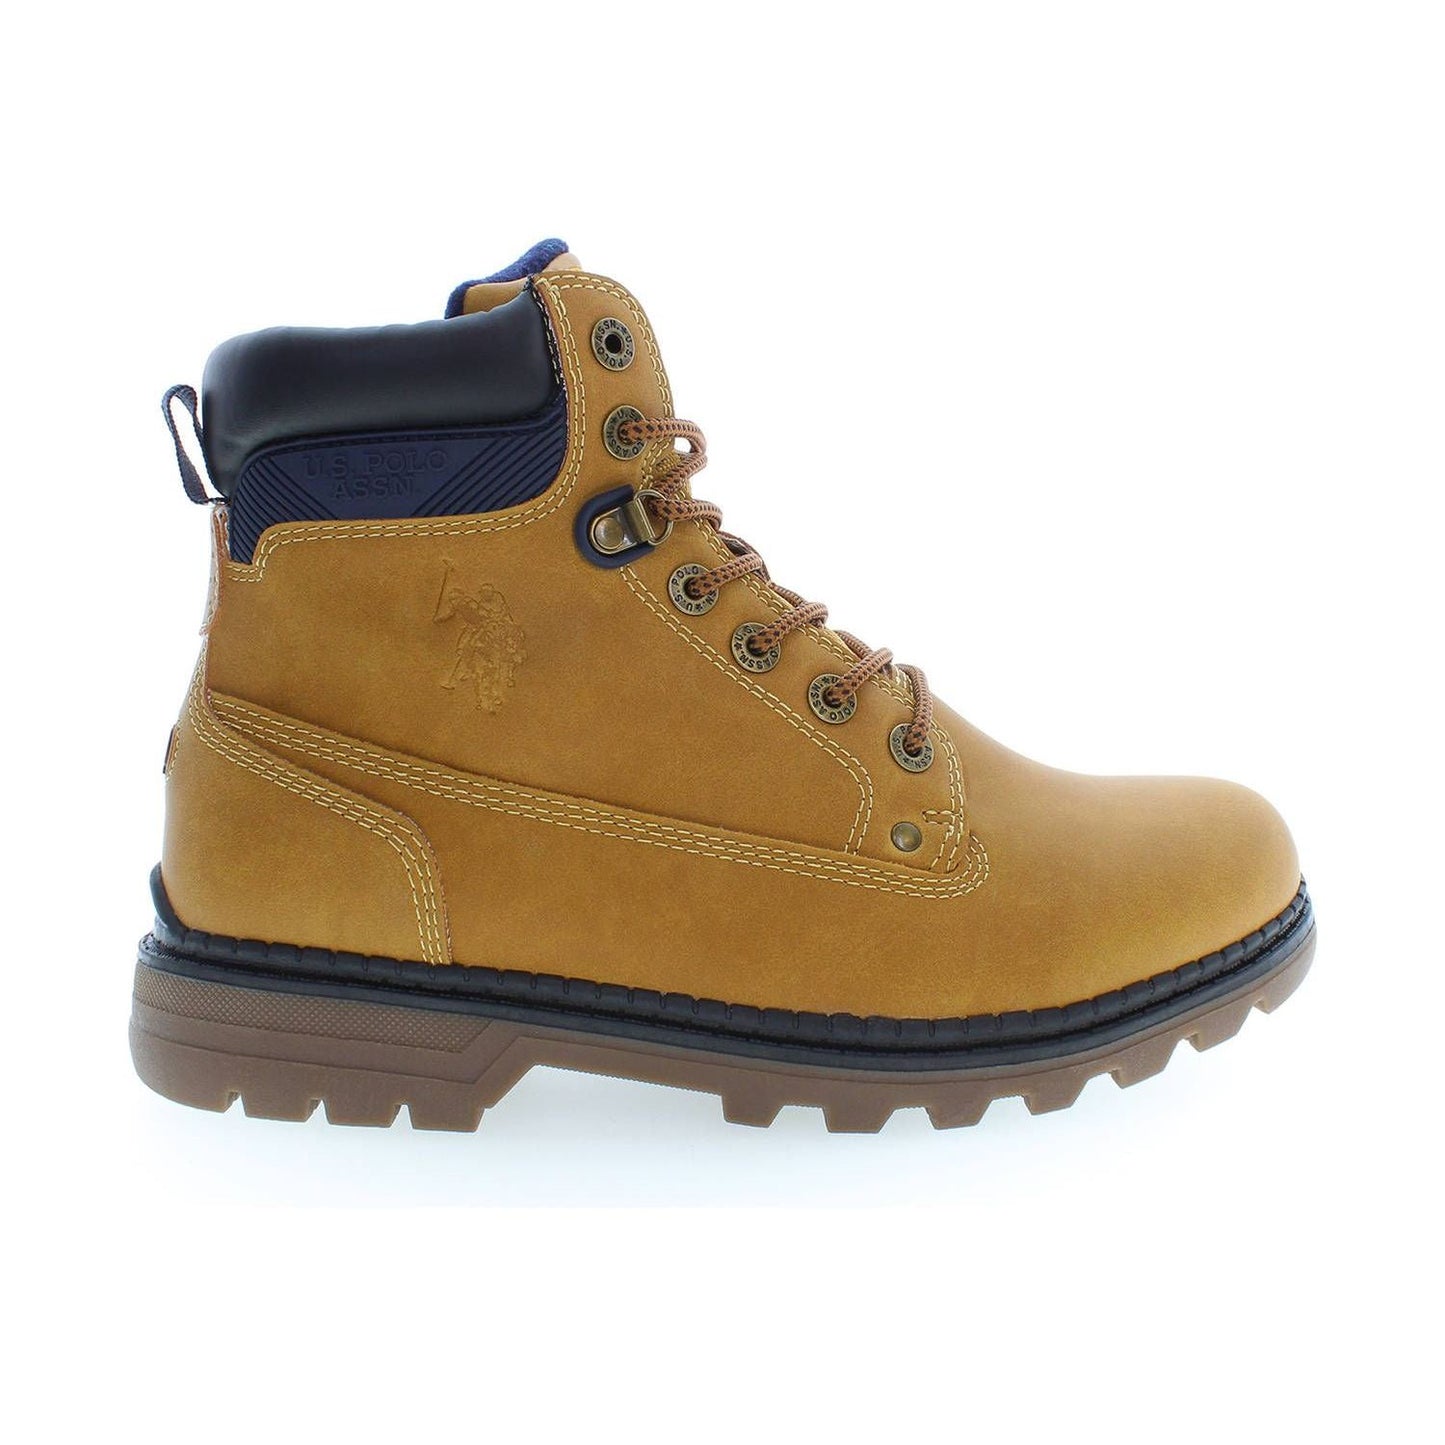 U.S. POLO ASSN. Beige High-Top Boots with Logo Detailing beige-high-top-boots-with-logo-detailing